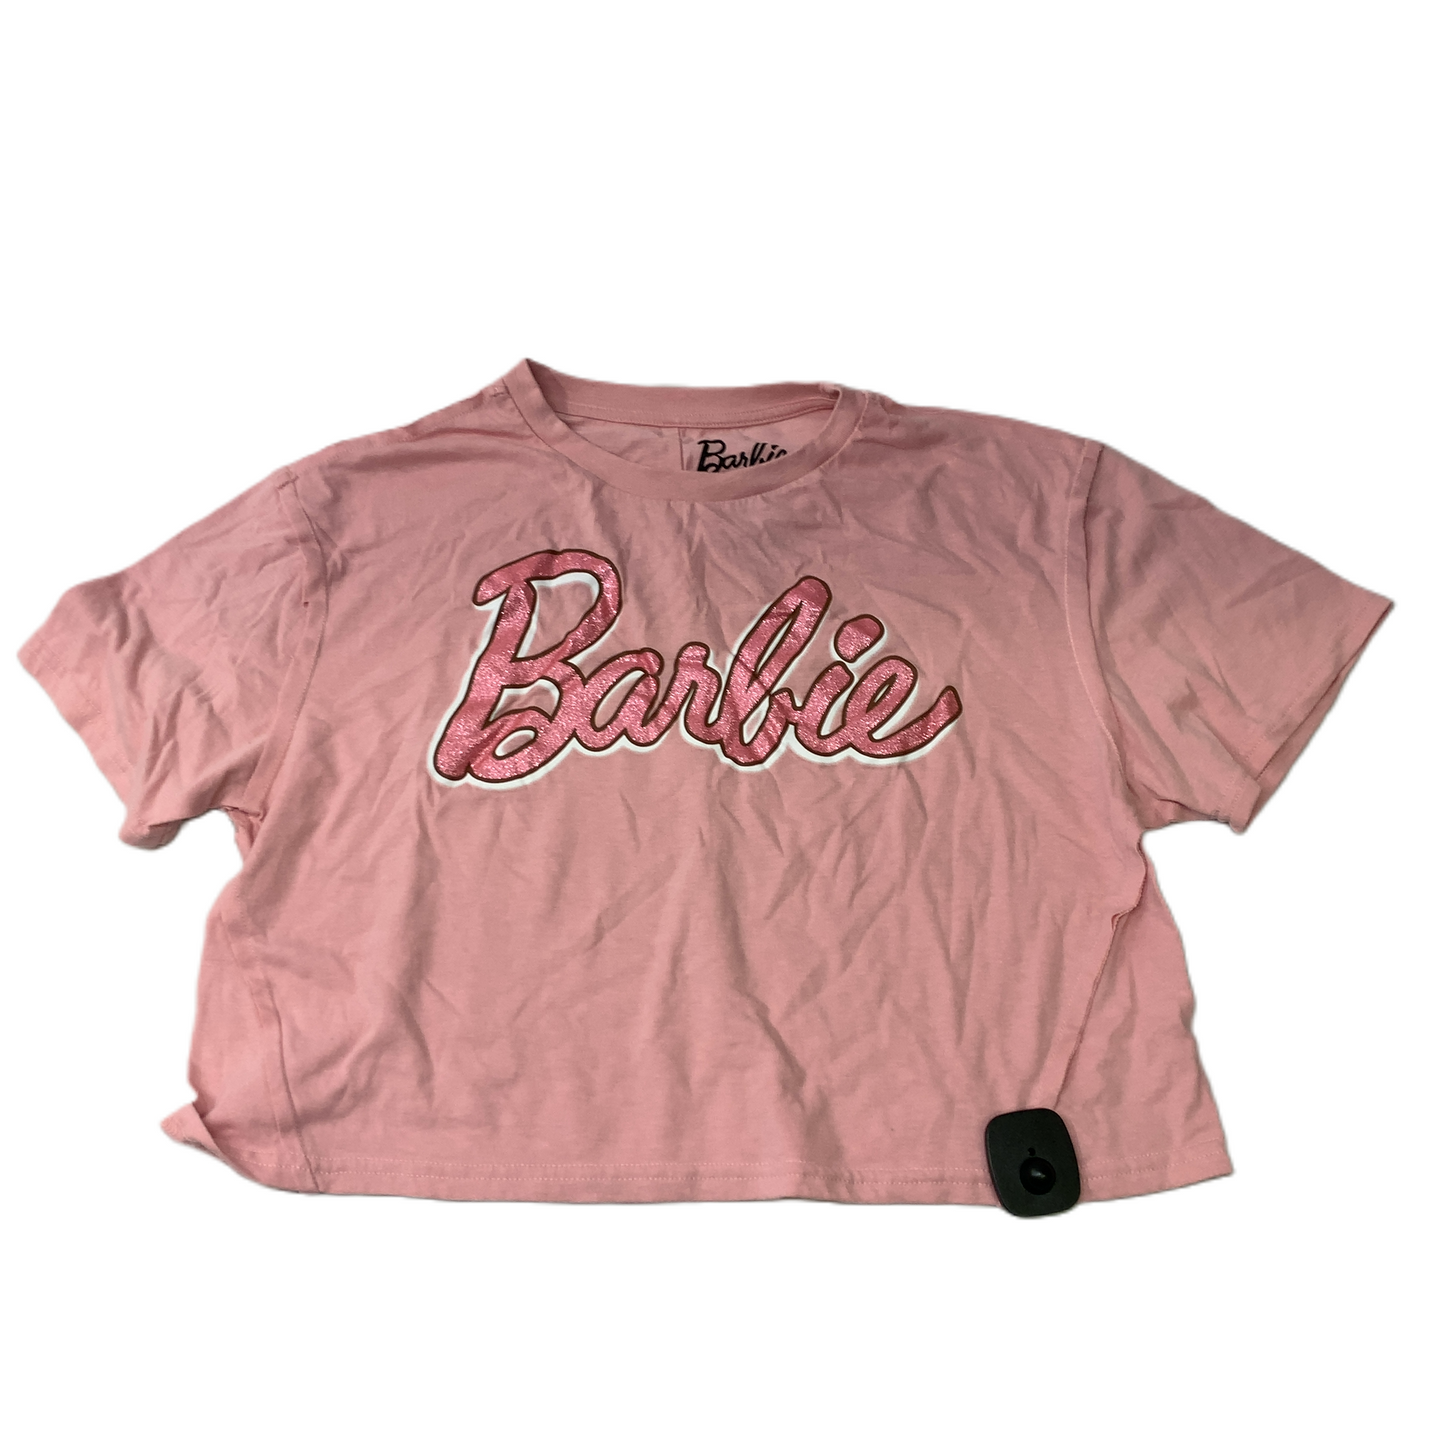 Pink  Top Short Sleeve By Barbie  Size: M